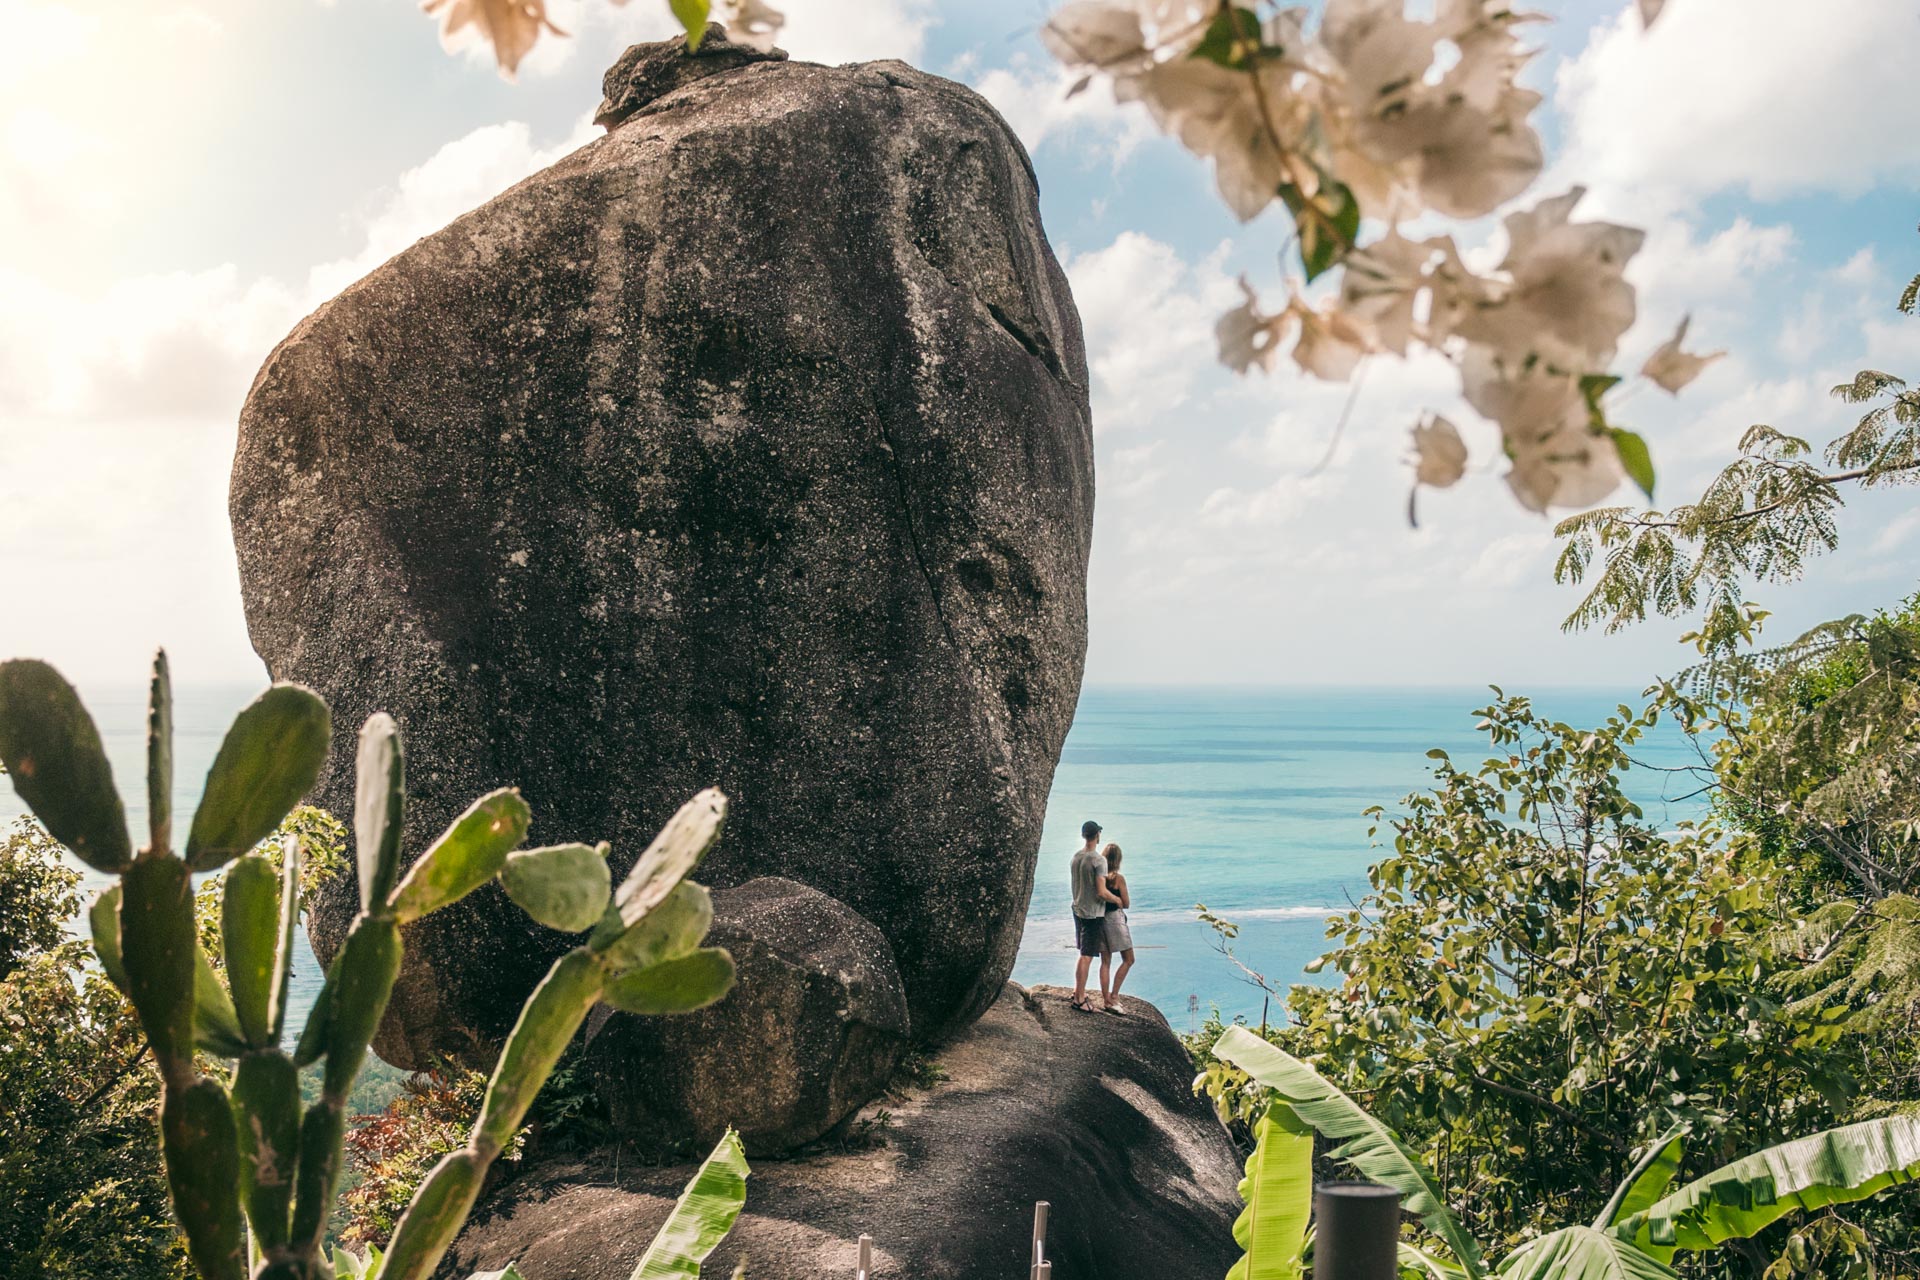 Overlap Stone in Koh Samui Travel Guide: How to Visit & What To Expect